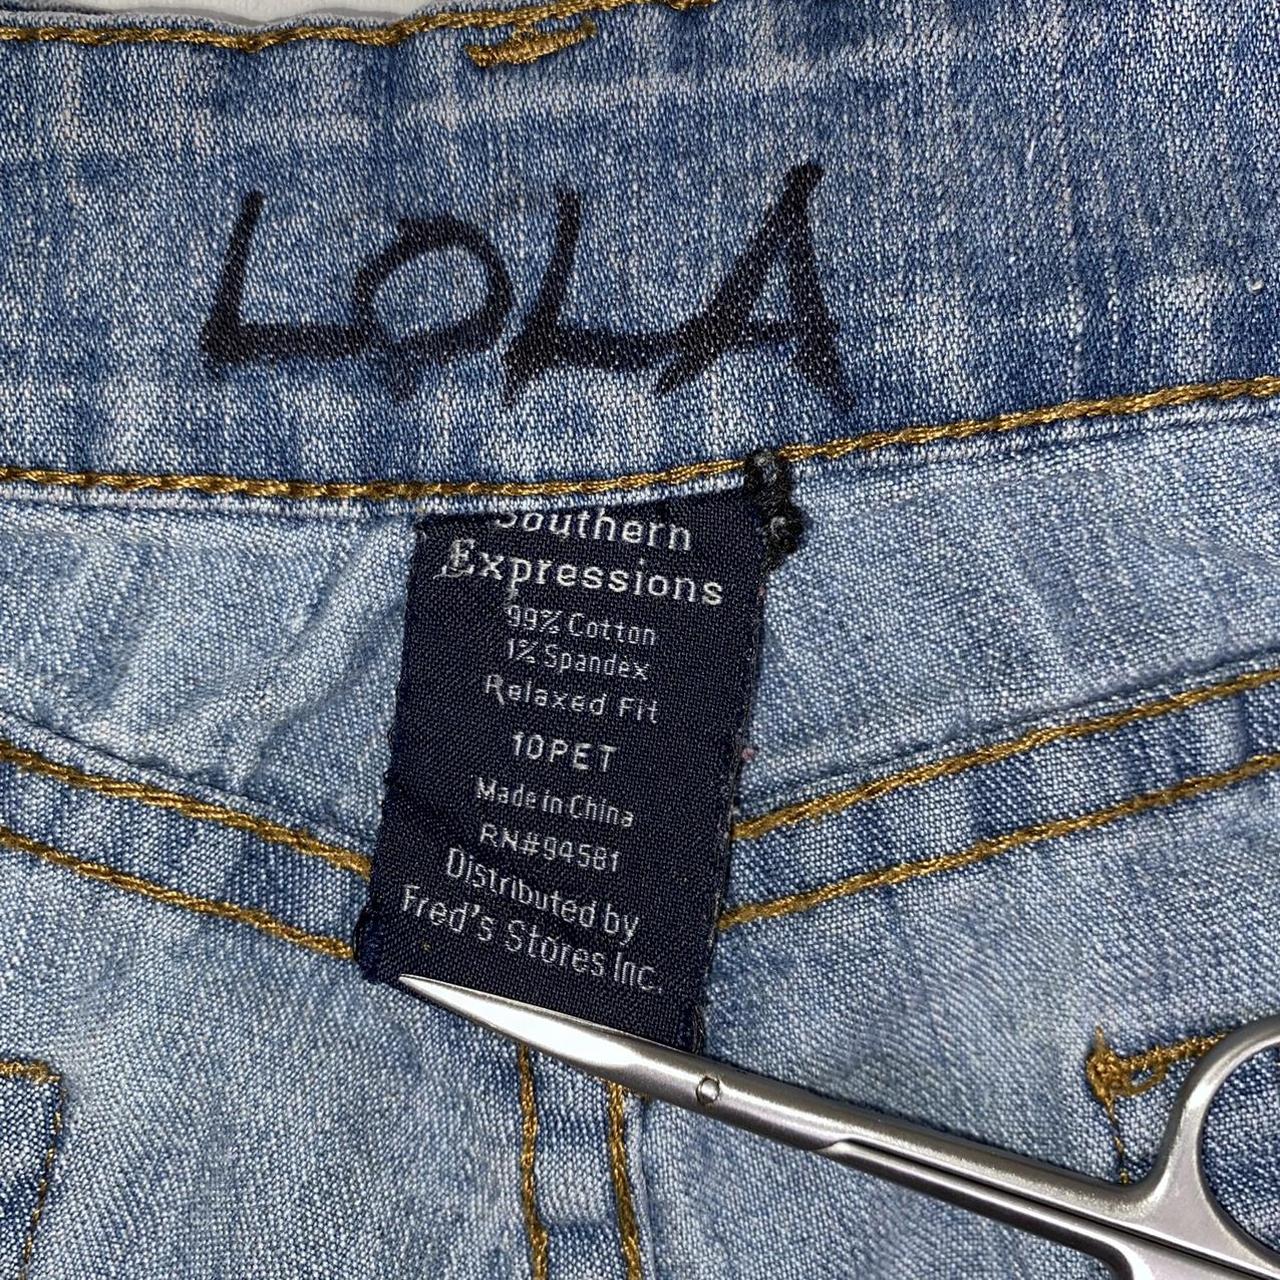 Product Image 4 - Southern Expression LOLA mom jeans
Size